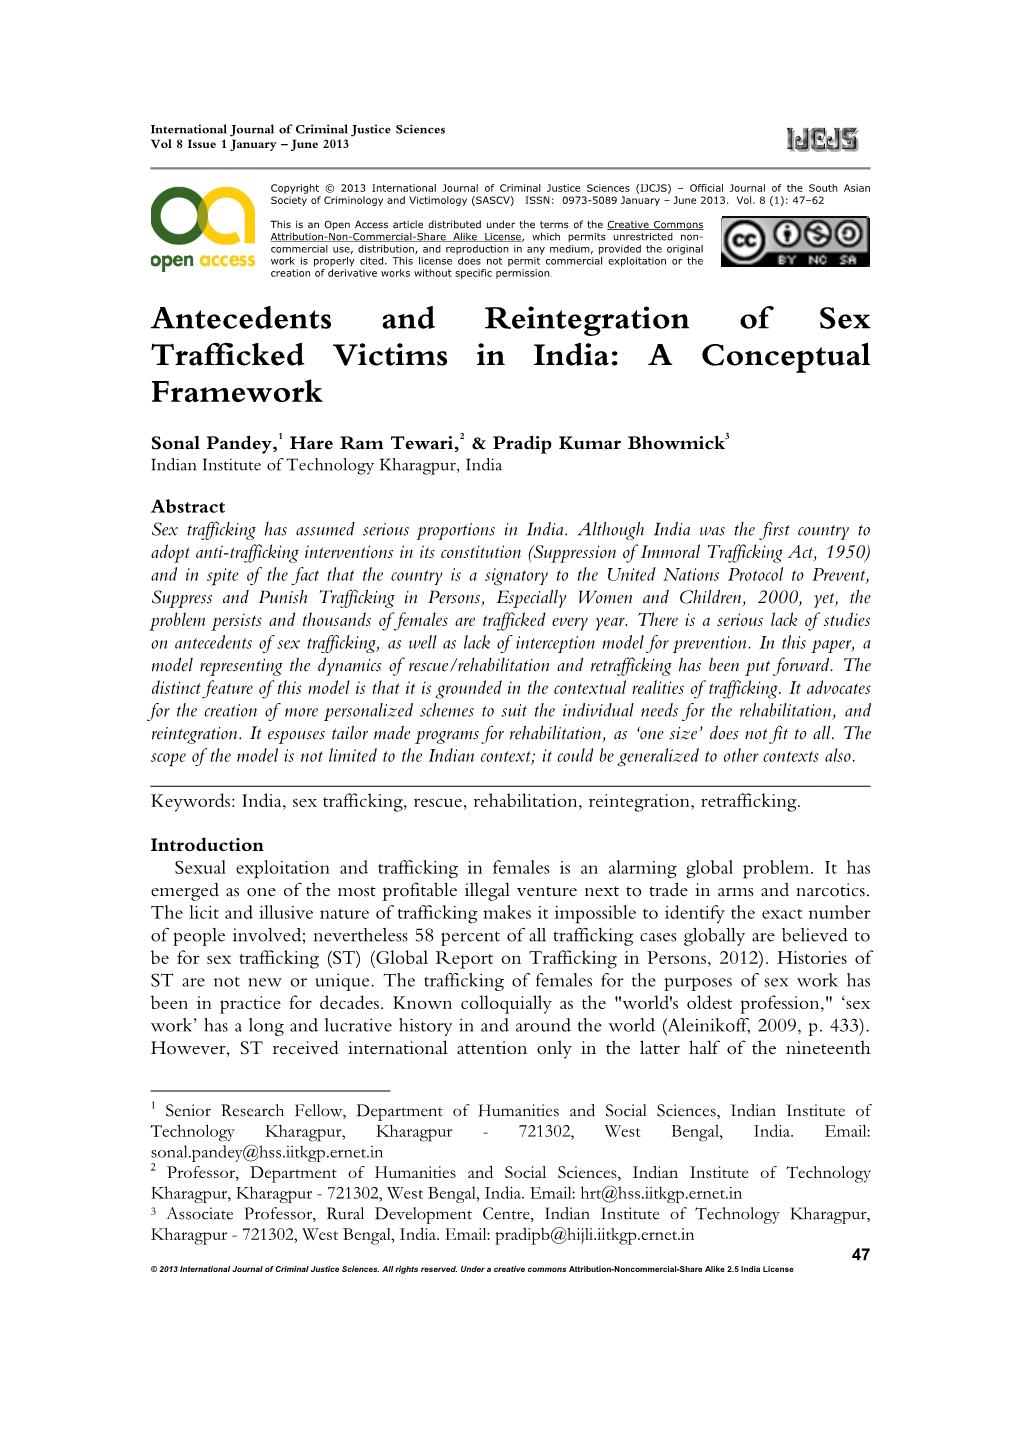 Antecedents and Reintegration of Sex Trafficked Victims in India: a Conceptual Framework